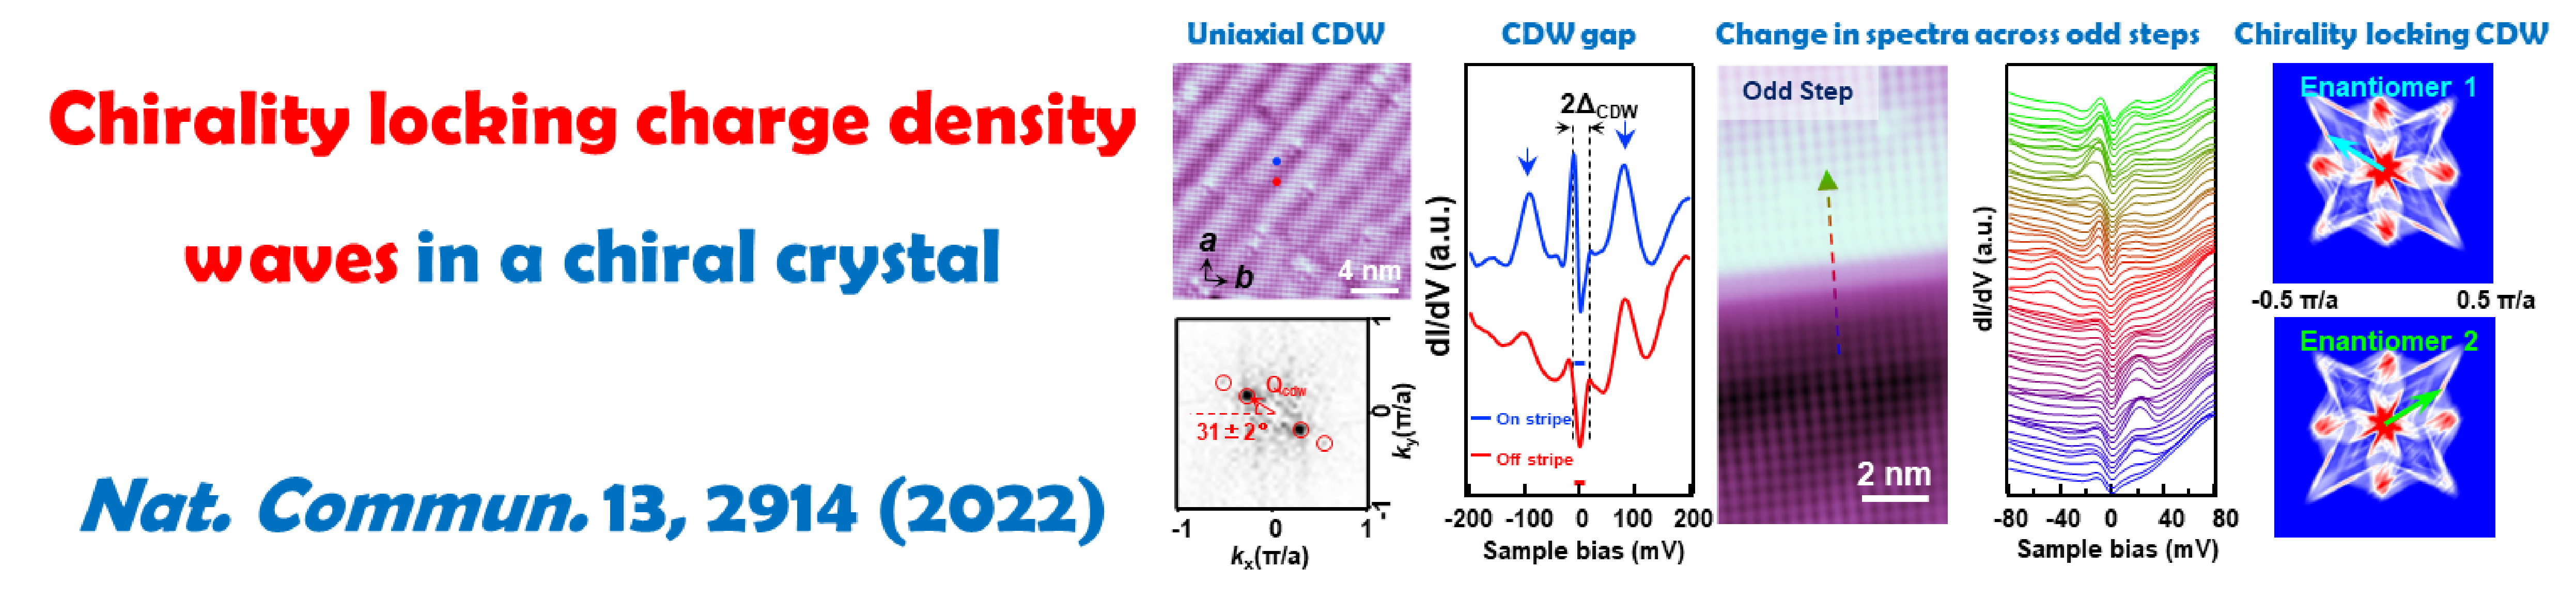 Chirality locking charge density waves in a chiral crystal